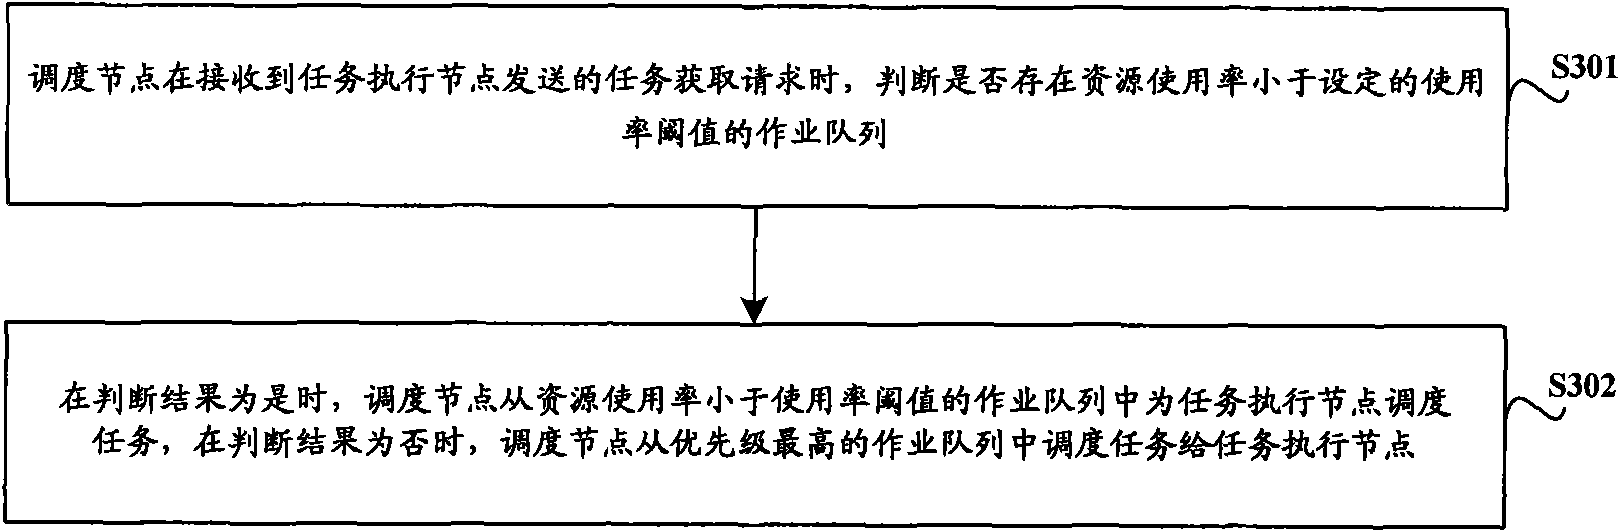 Multi-queue task scheduling method and related system and equipment